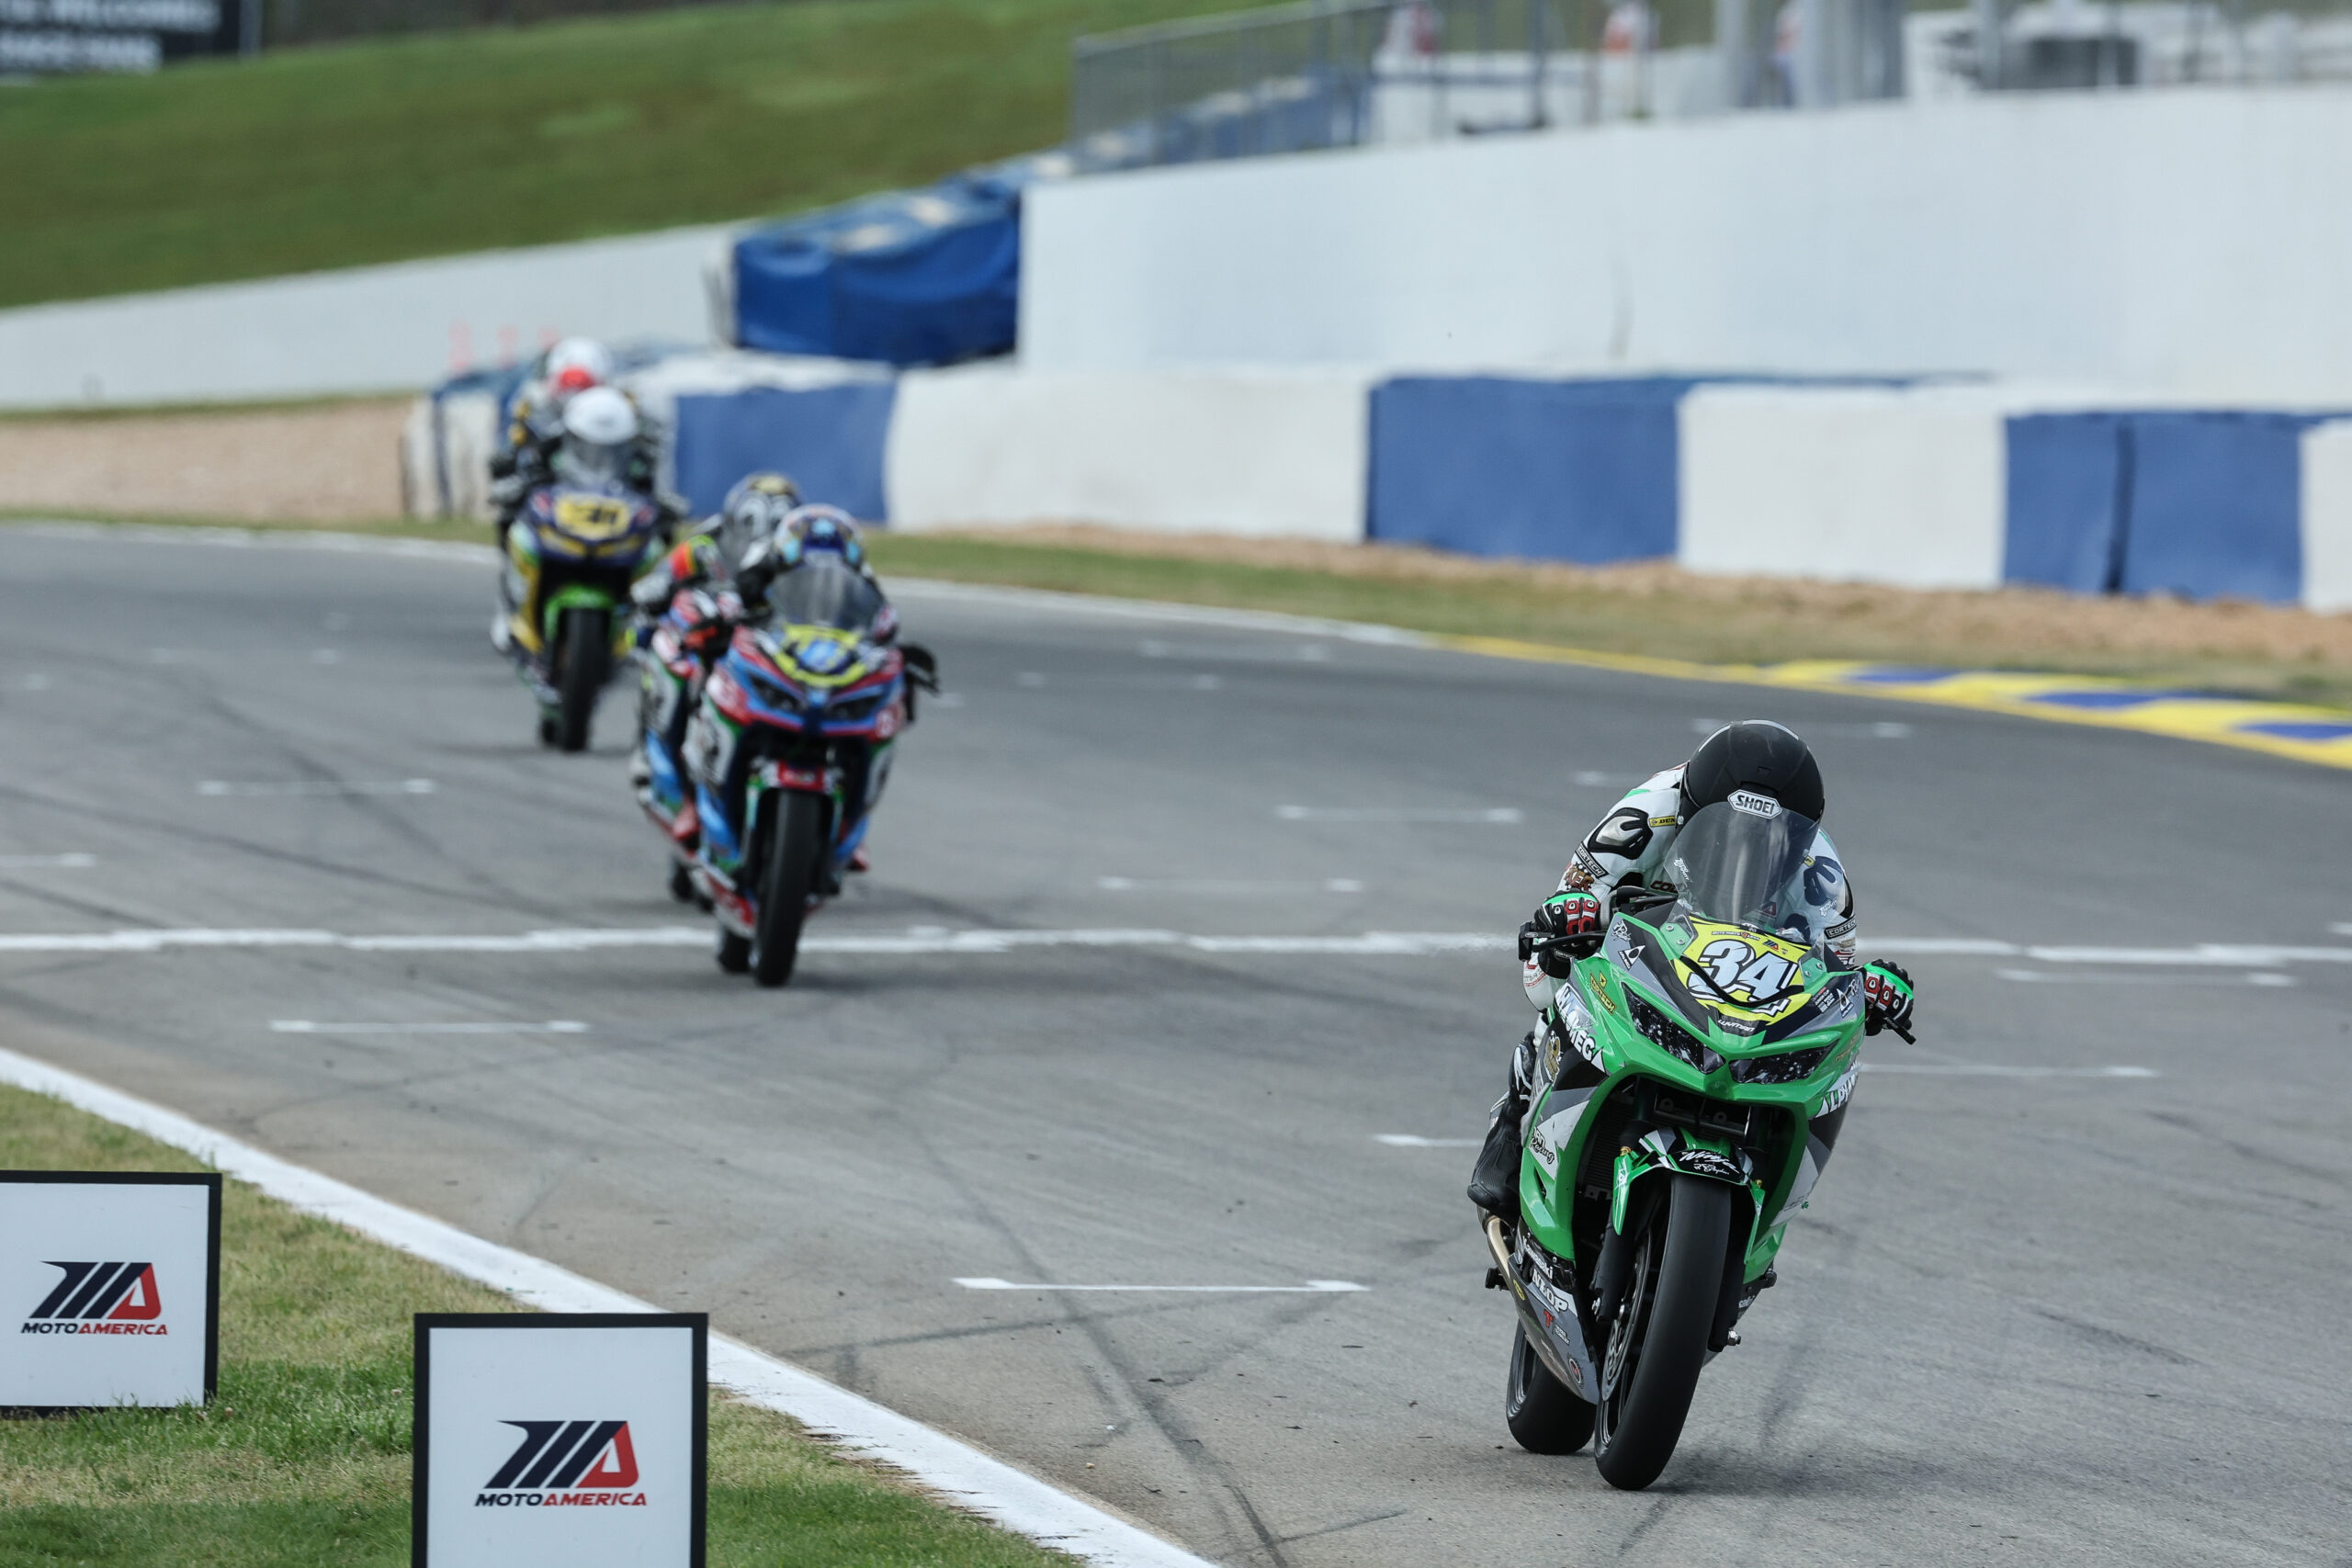 Motorcycle Racing: Race Leader Enters the Finish Line, MotoAmerica Organisation, Motorcycle Racers. 2560x1710 HD Wallpaper.